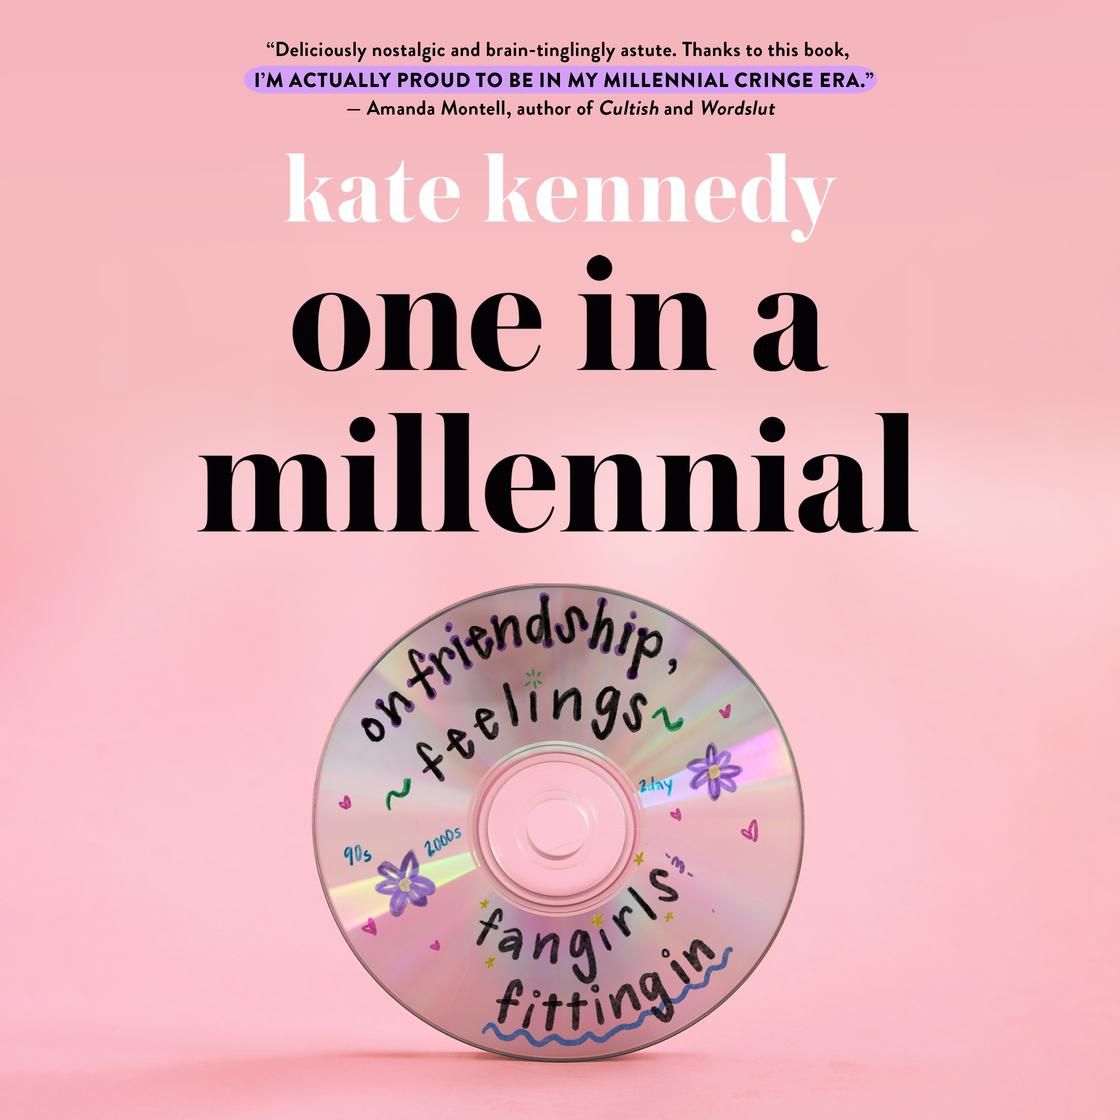 One in a Millennial | Libro.fm (US)